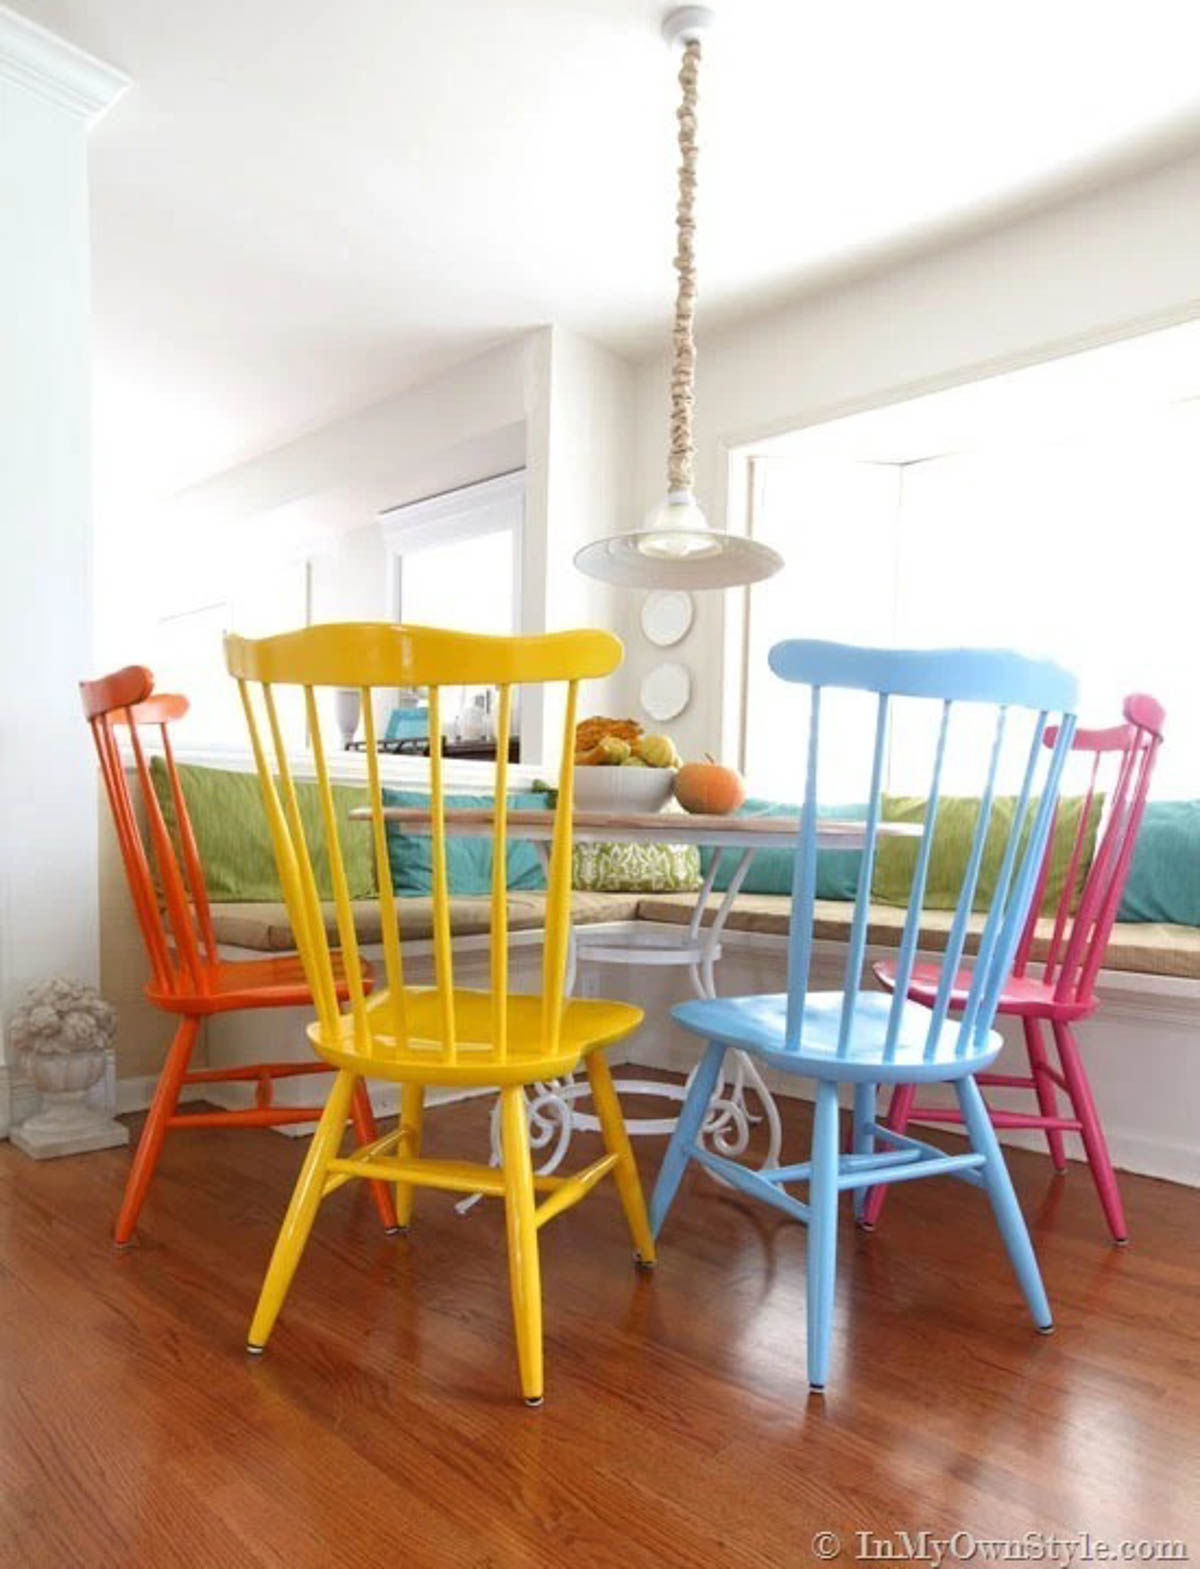 spray painted chairs in yellow, red and blue around a dining room table